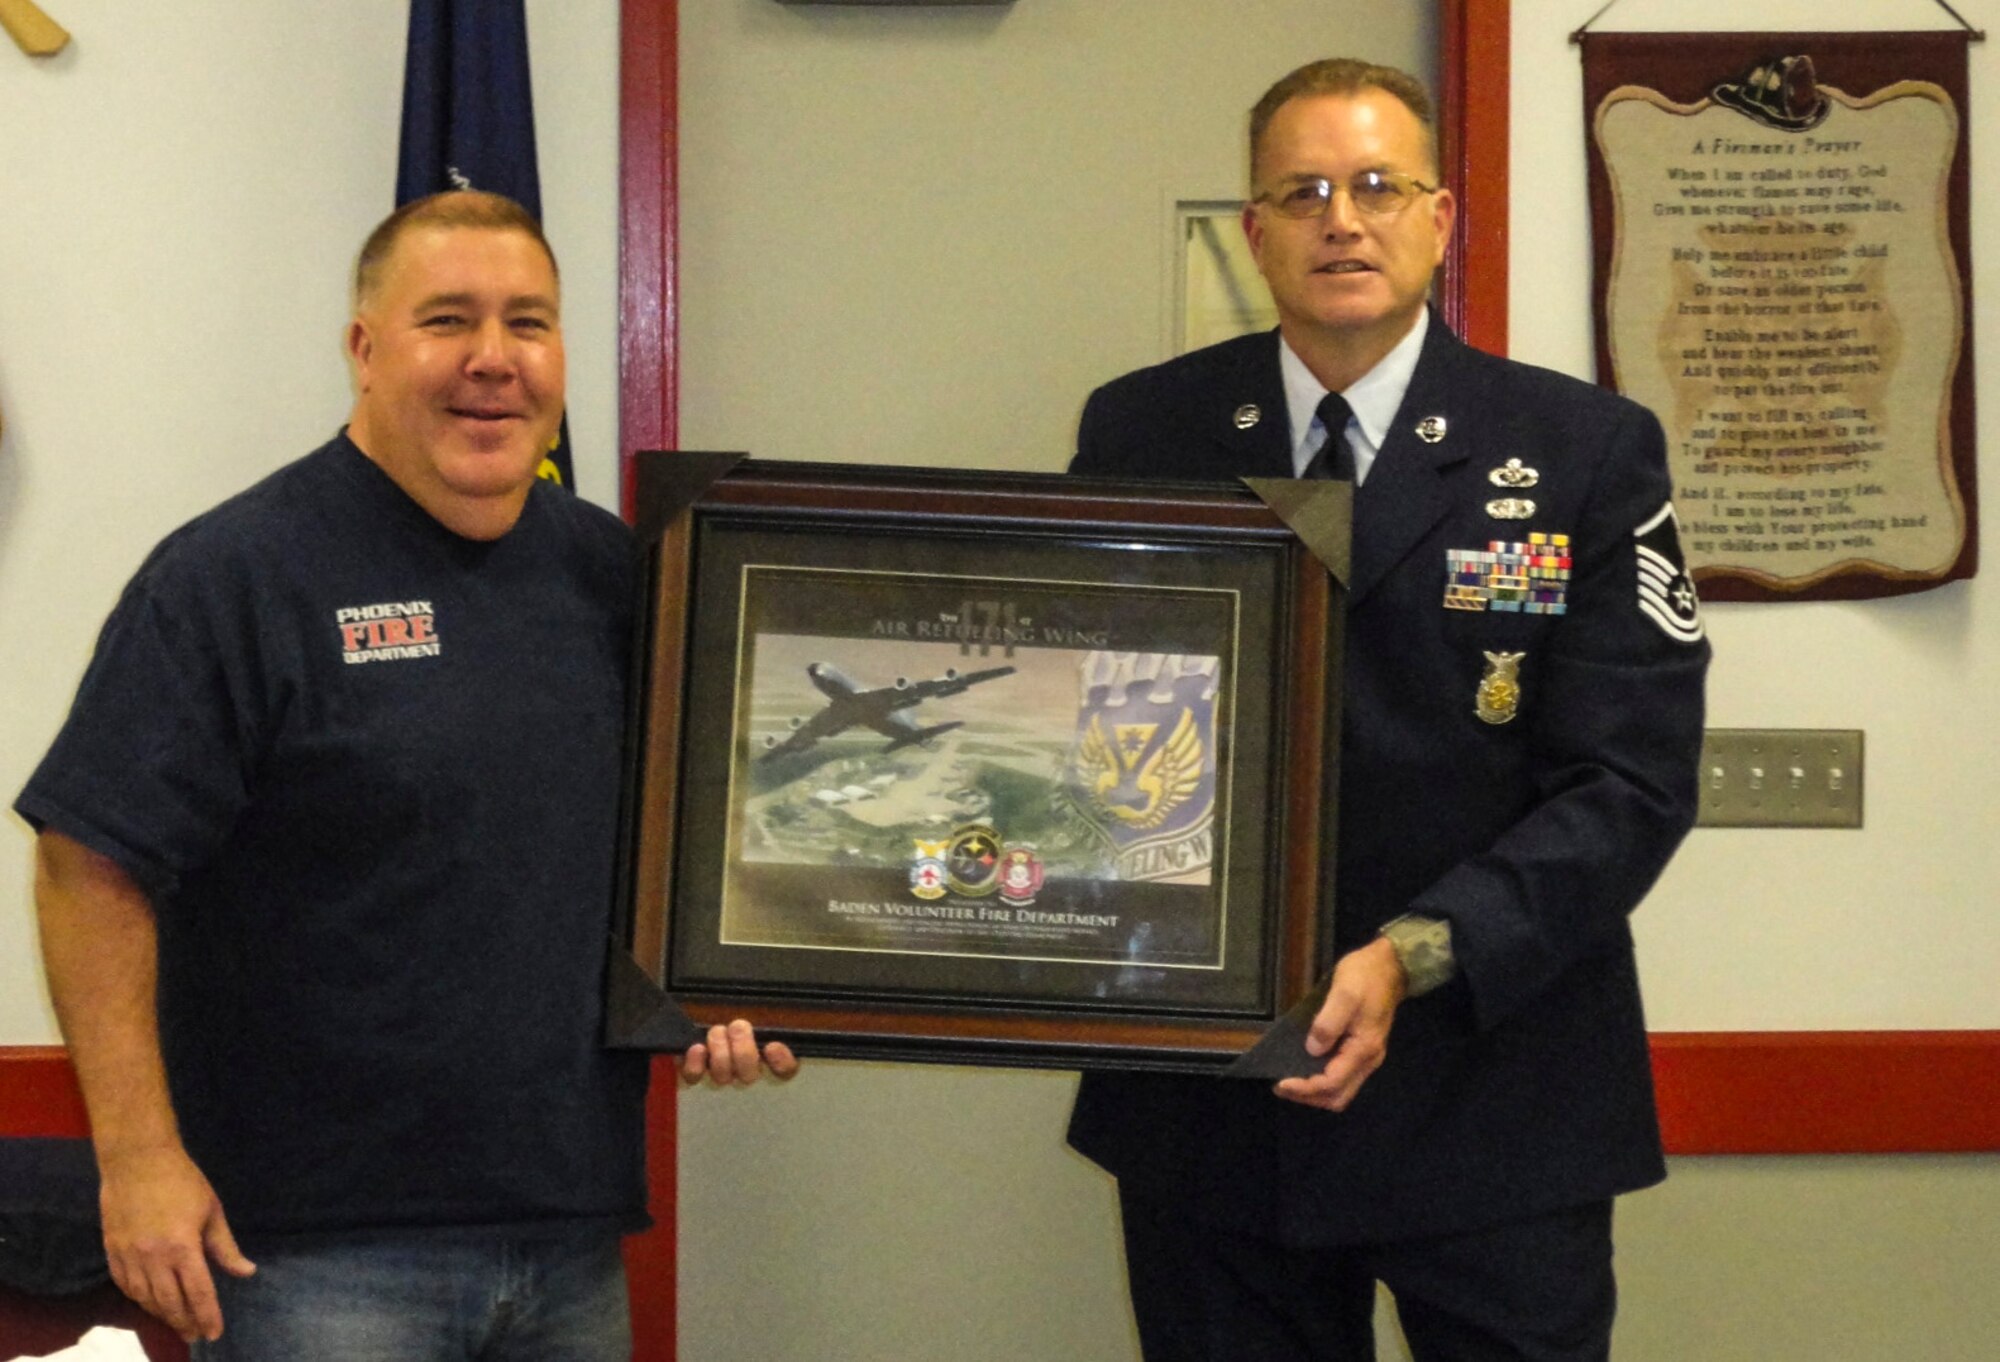 Master Sgt. Gary L. Shannon, 171st Installation Fire Chief, presents an appreciation award to Dave Trzciankia , Fire Chief of the Baden Volunteer Fire Department, Dec. 3, 2015. (U.S. Air National Guard Photo)